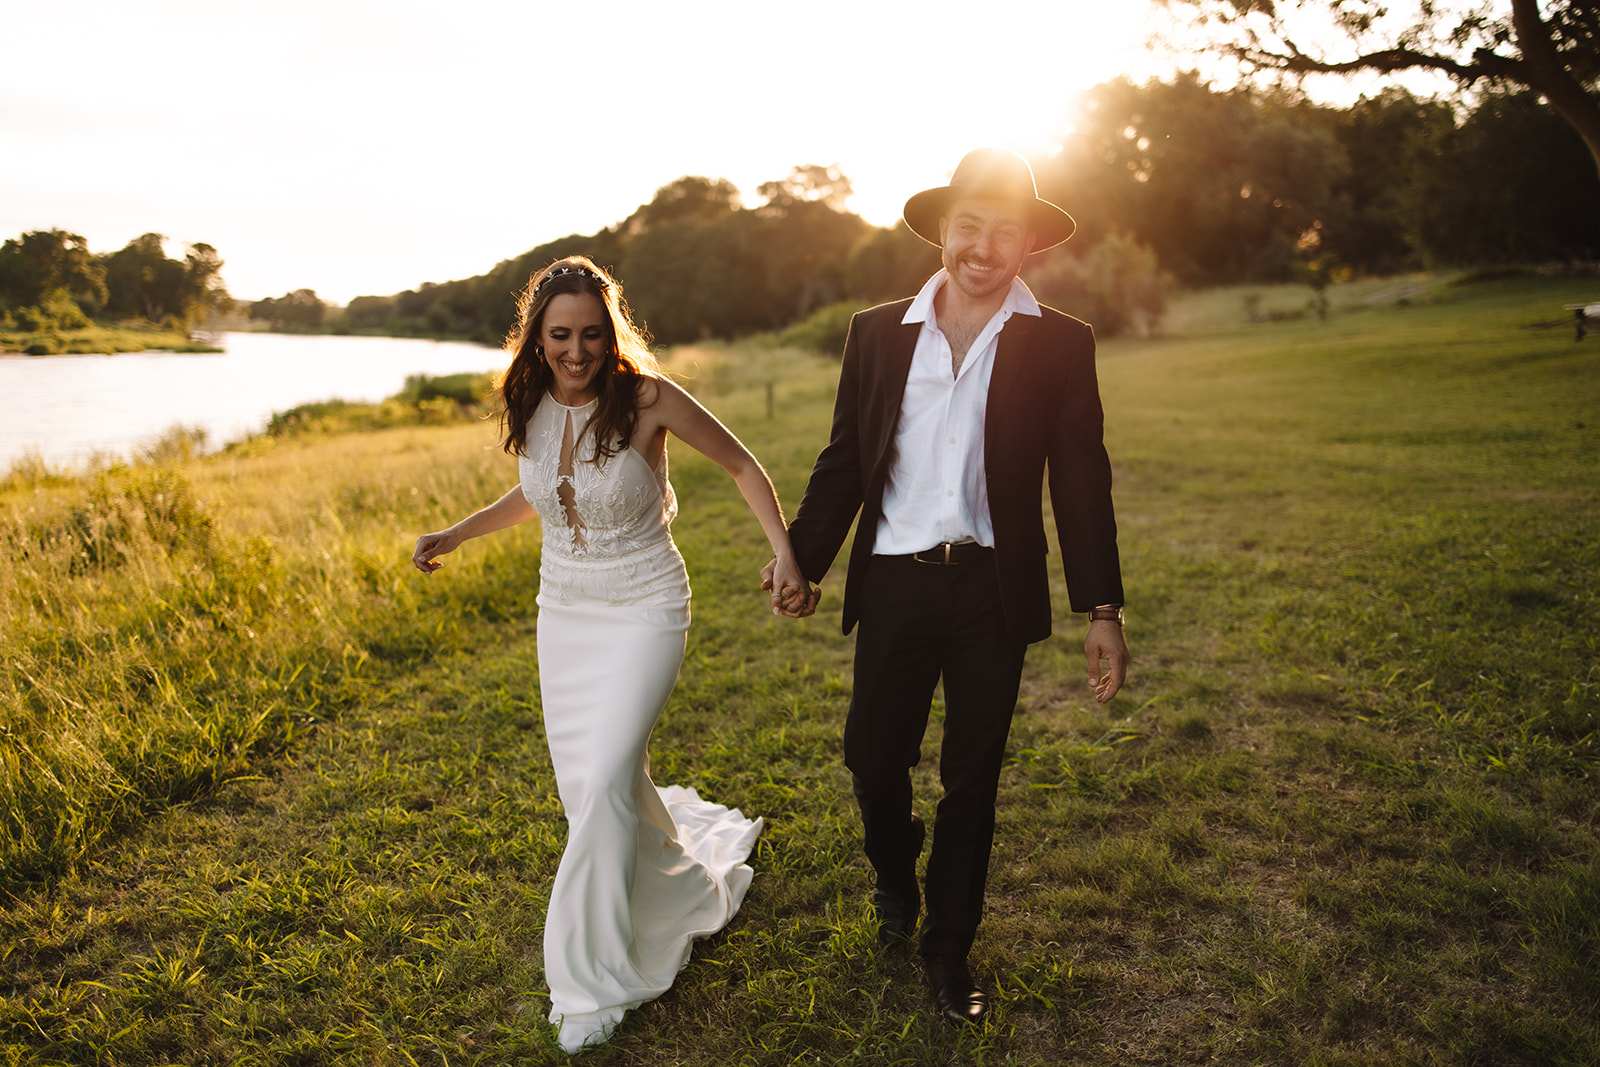 A couple dressed in wedding attire, with the groom in a hat, holding hands and walking on a grassy field by a river at sunset.